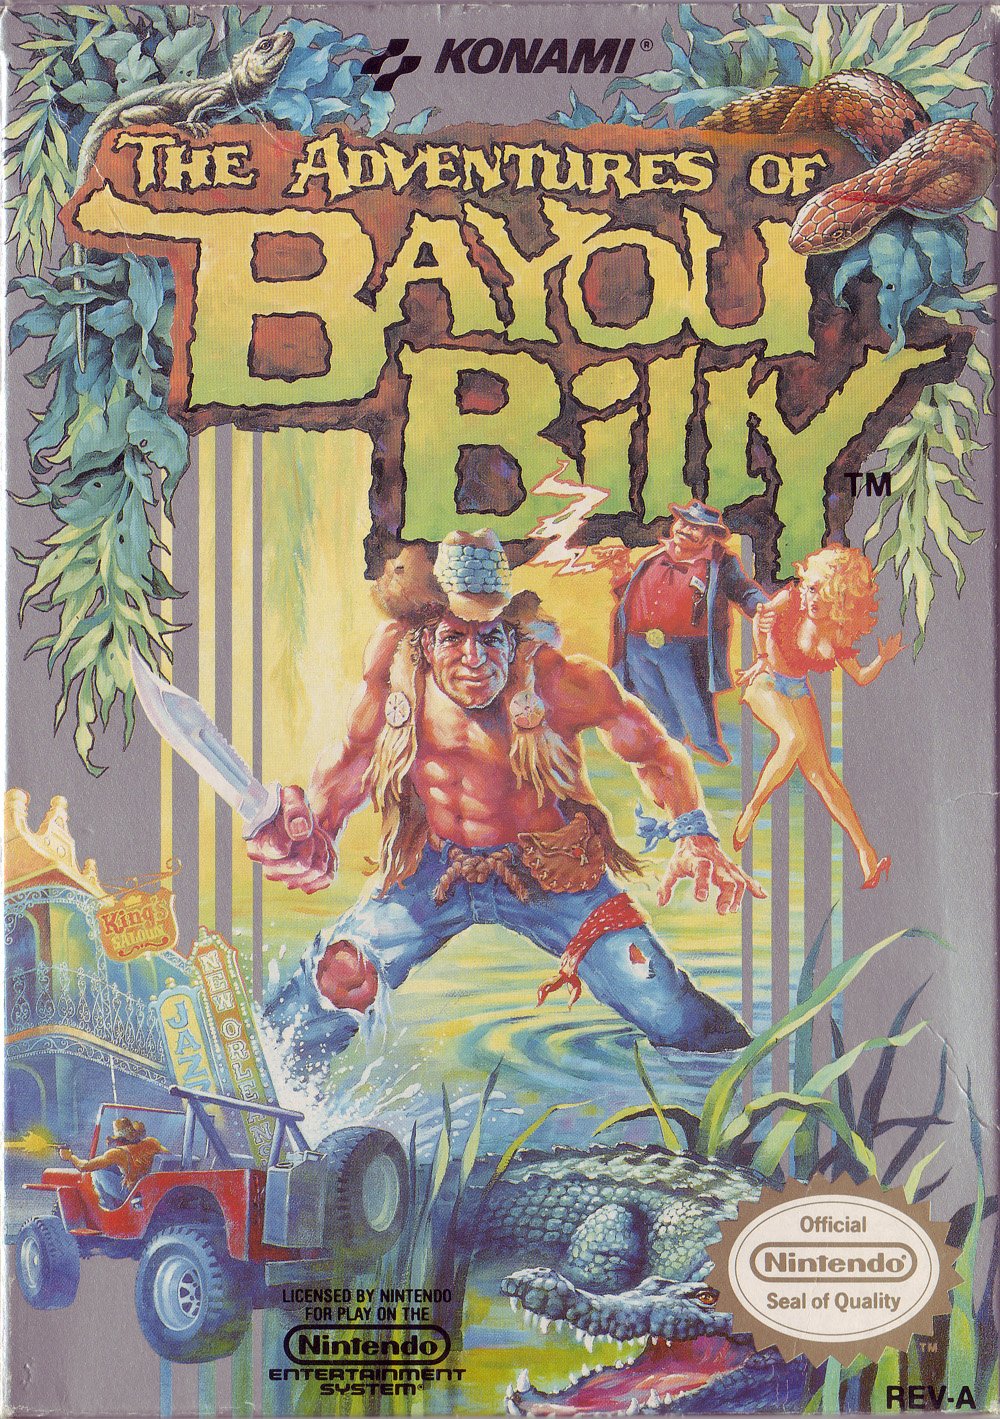 Image of The Adventures of Bayou Billy